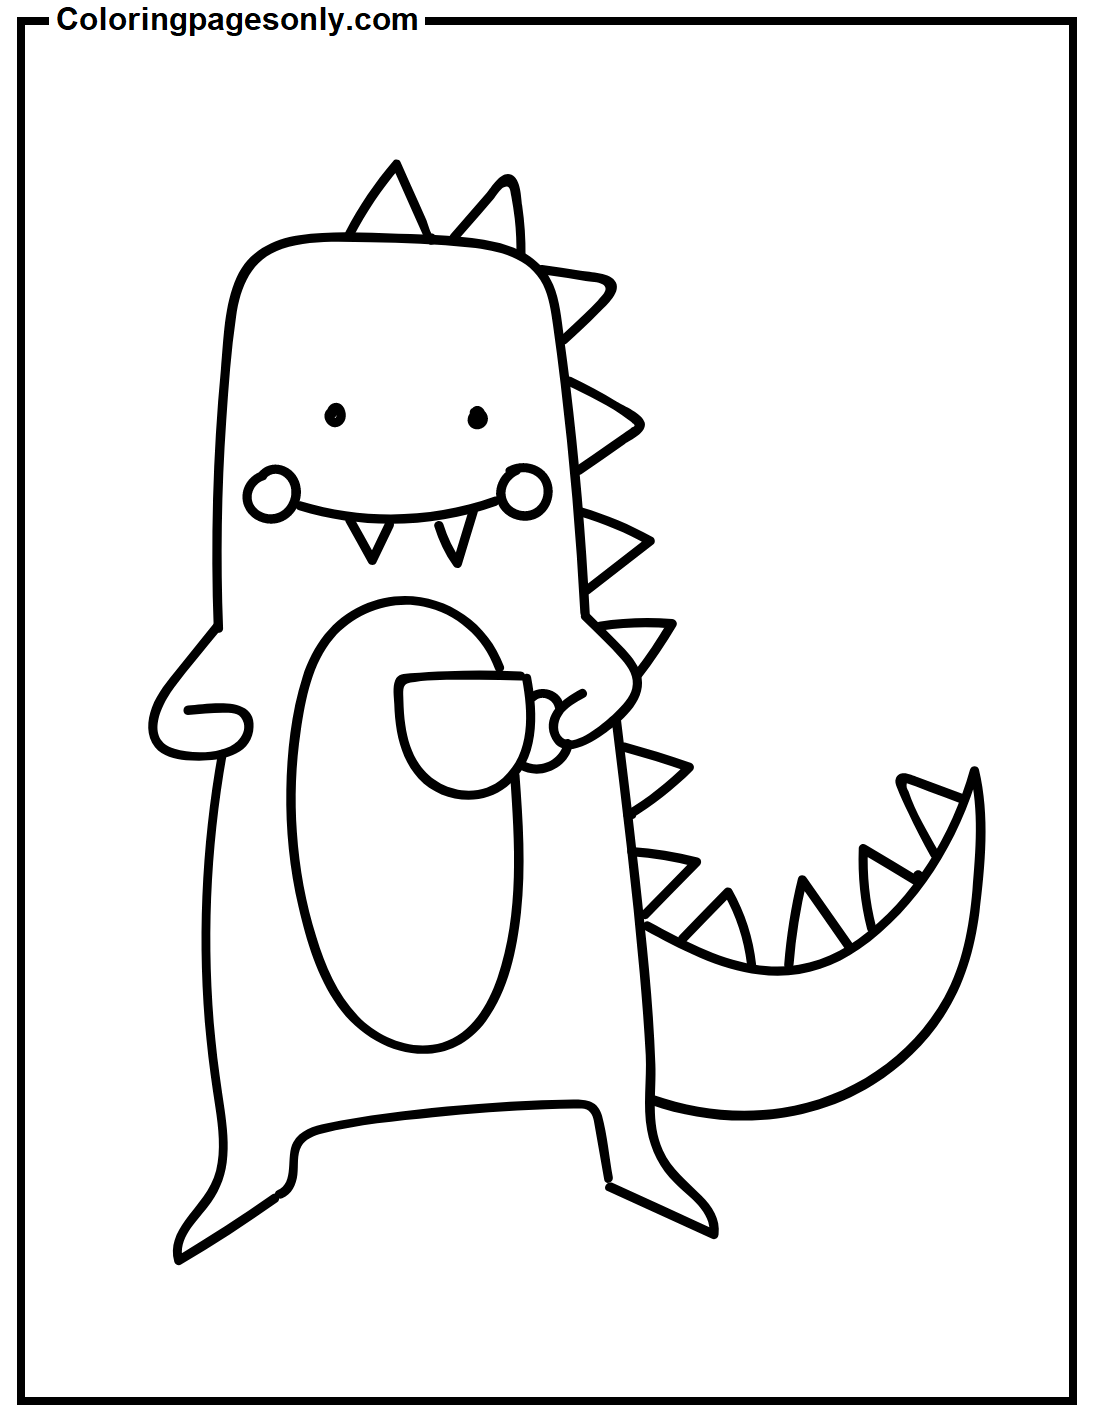 T-rex Drinking Tea Coloring Pages